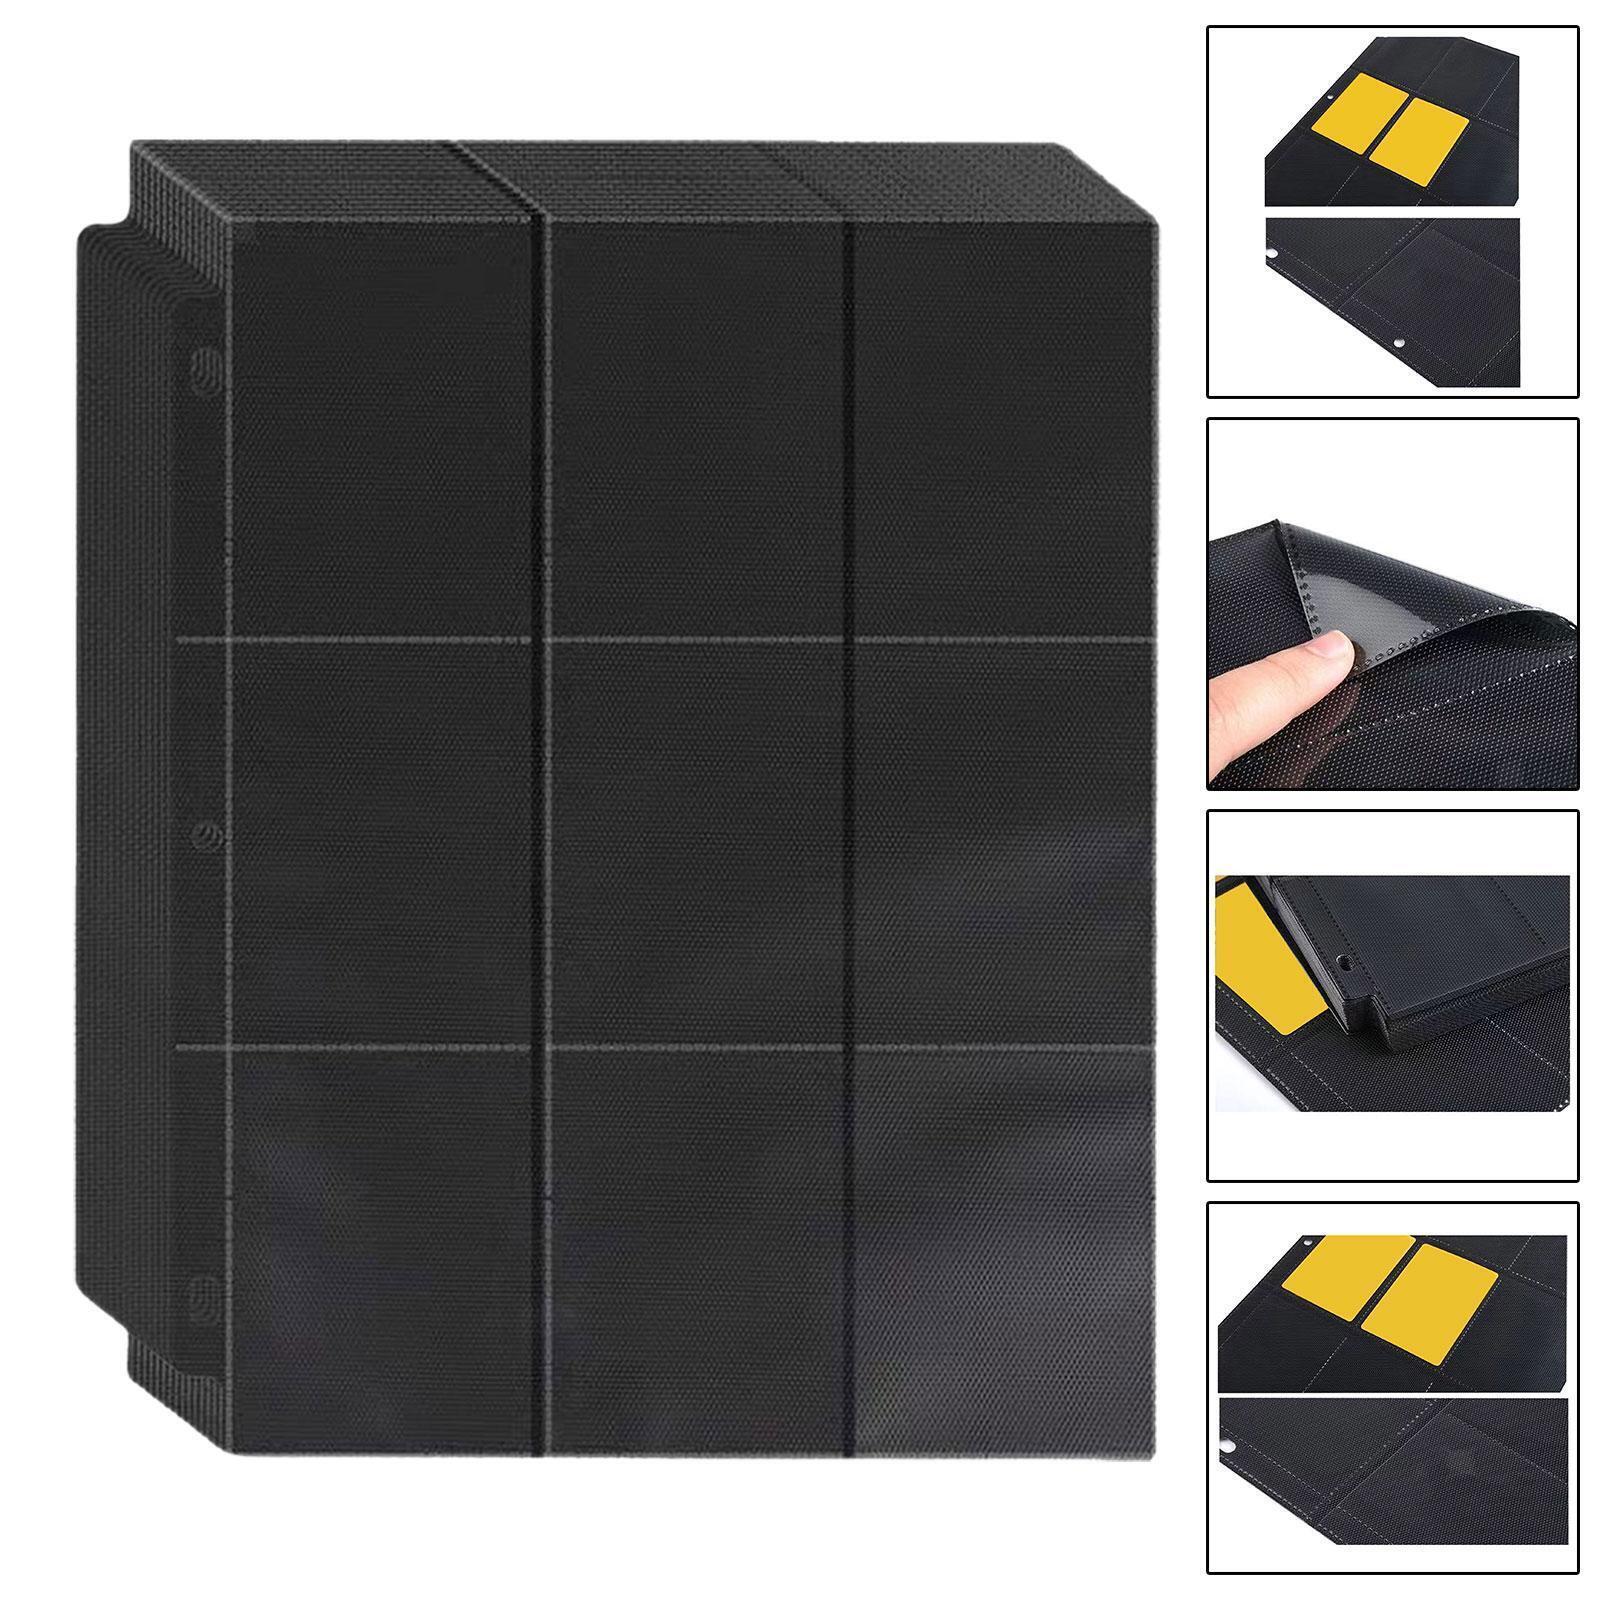 50 Page Card Sleeves Storage Display for Pictures Trading Cards Photocard